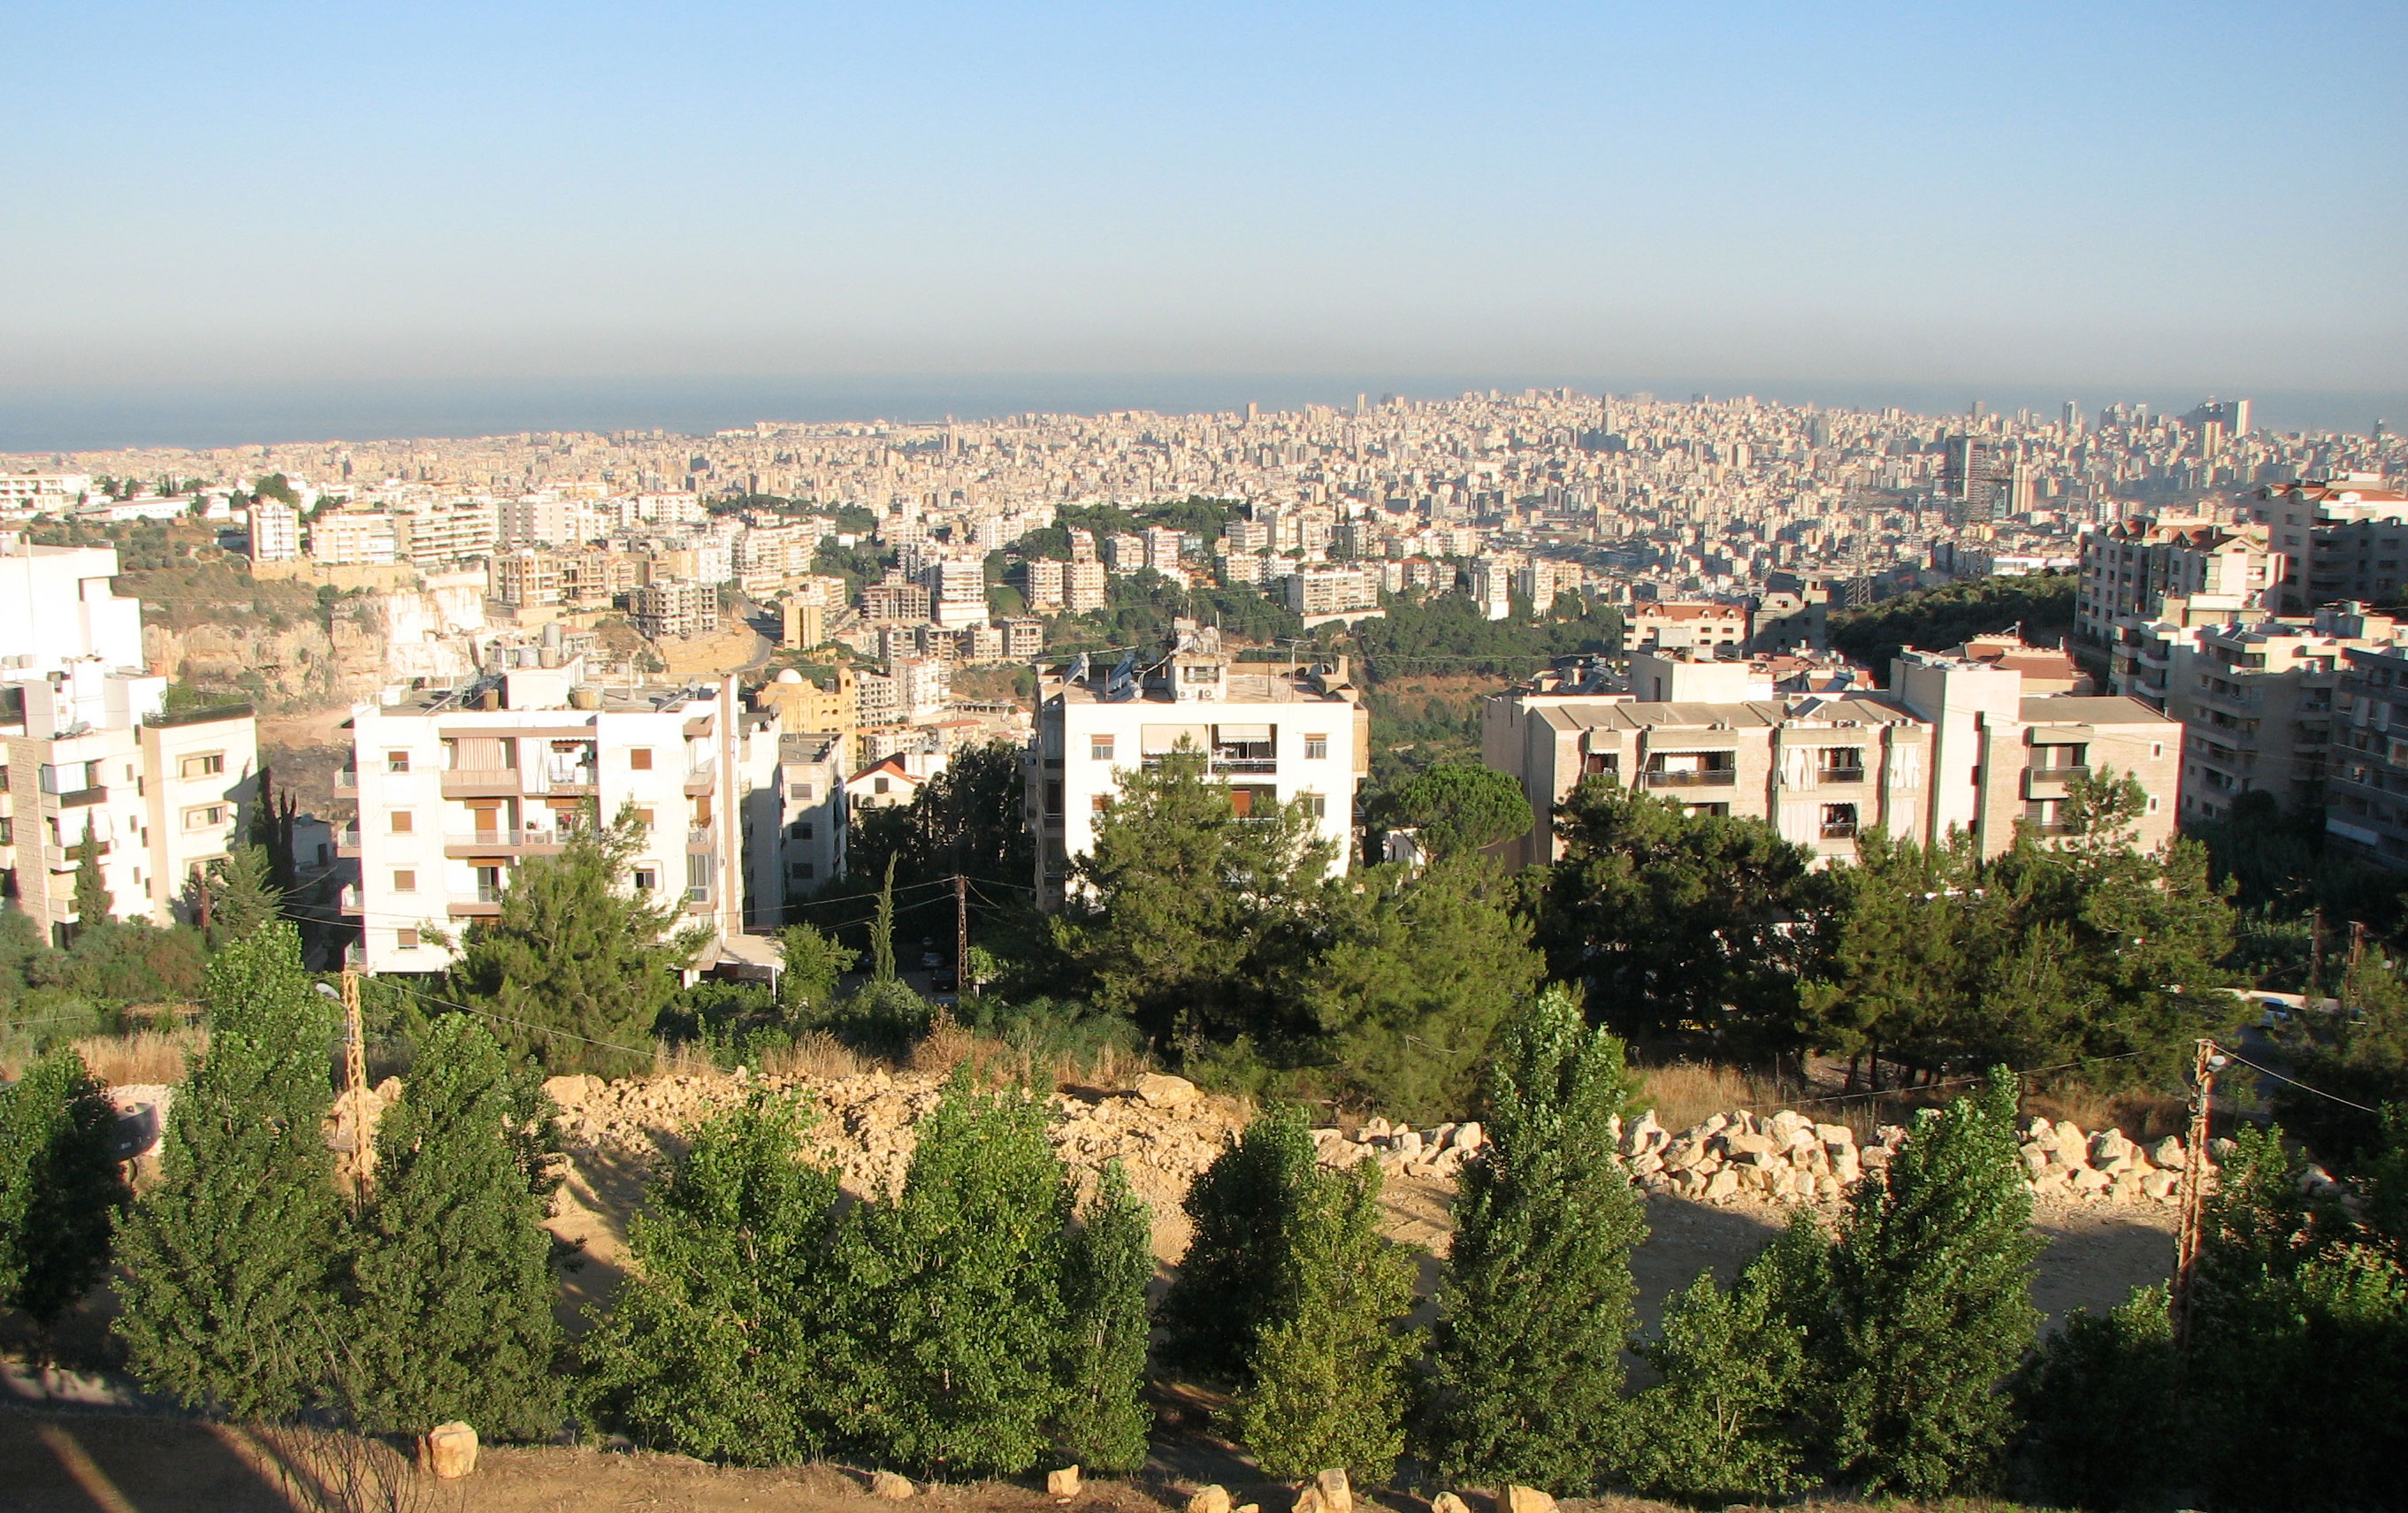 We look forward to seeing the view from our new seminary campus, overlooking Beirut.